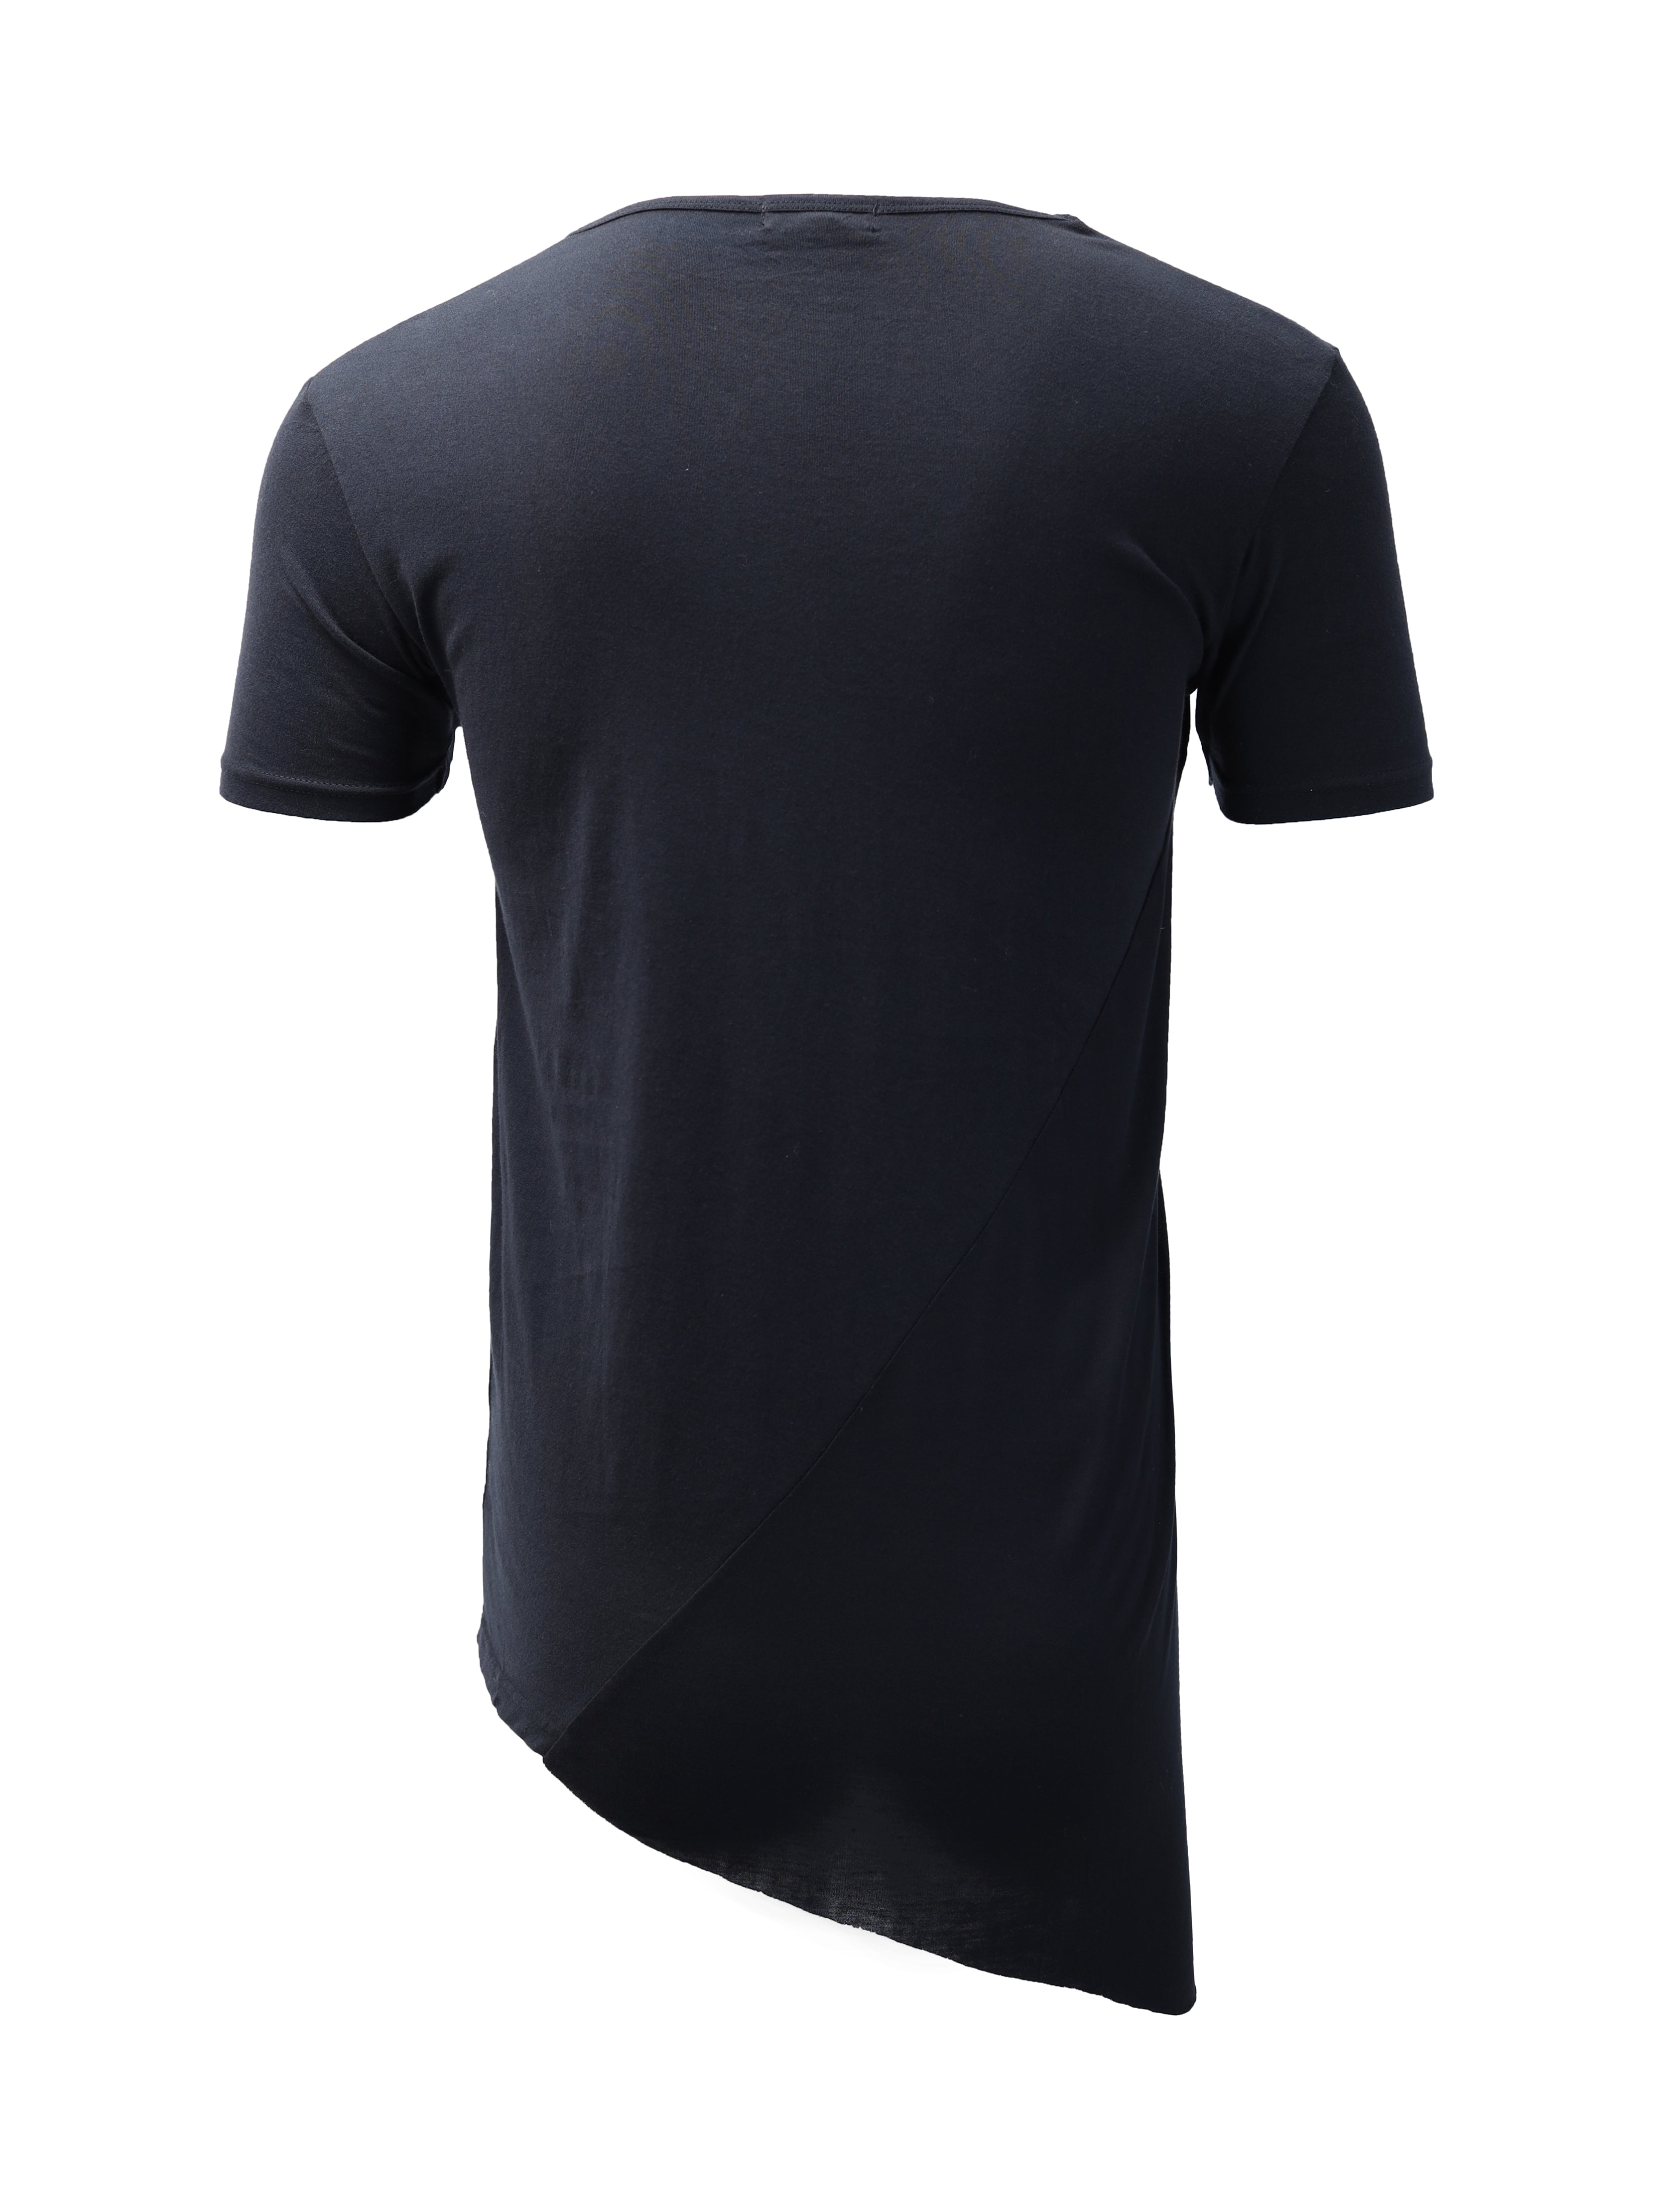 ASYMMETRIC RAYON AND COTTON T-SHIRT IN BLACK